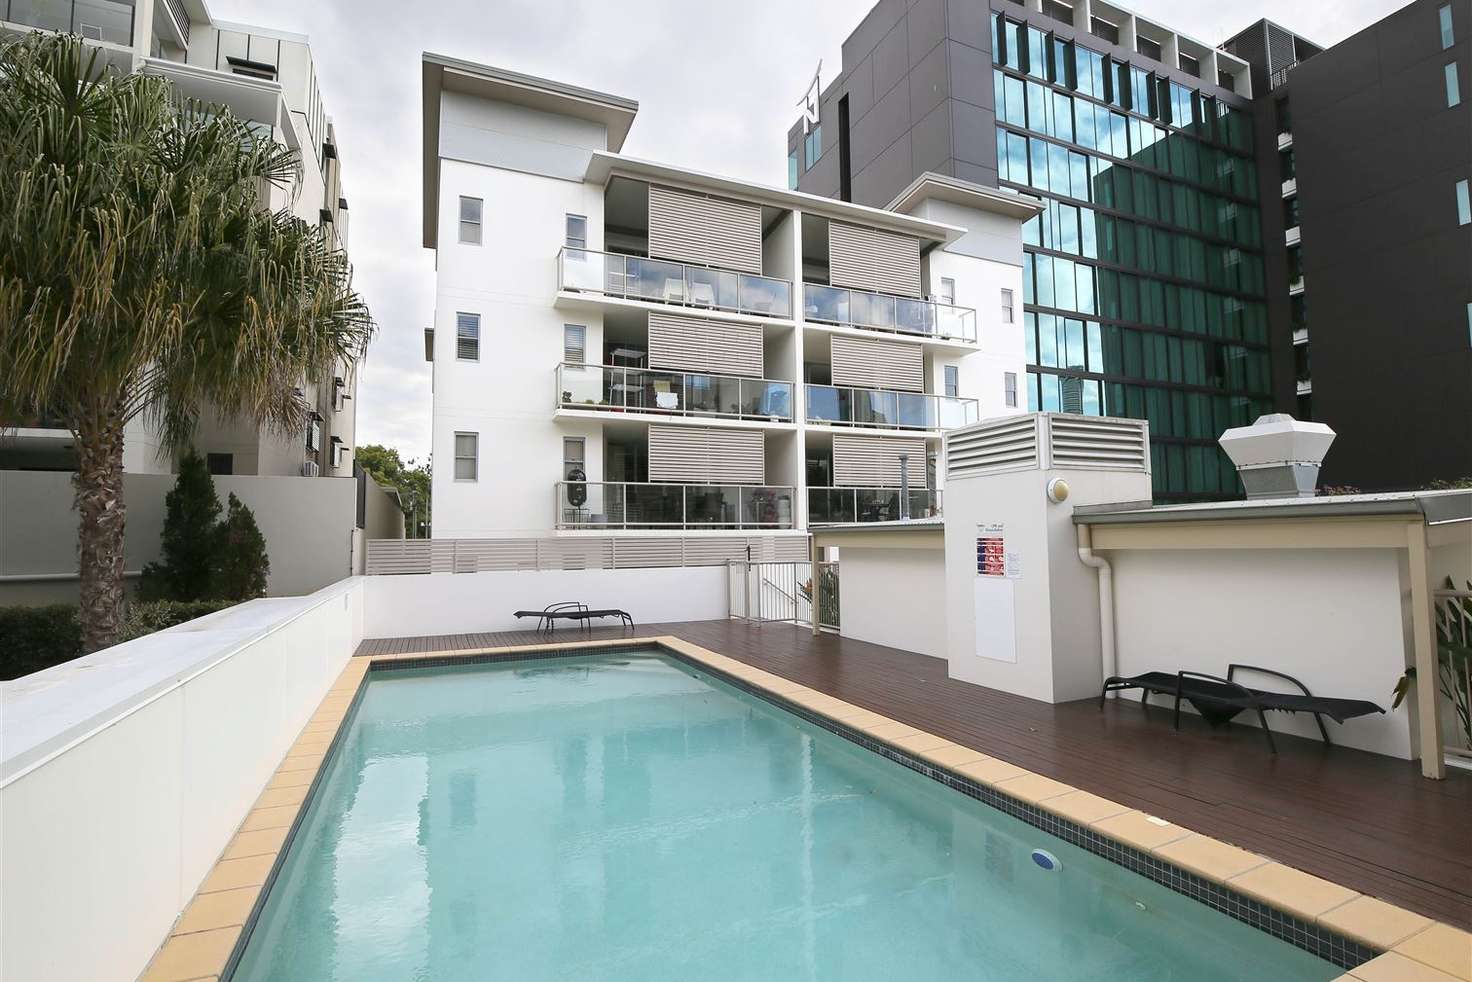 Main view of Homely unit listing, 32/42 Cordelia Street, South Brisbane QLD 4101